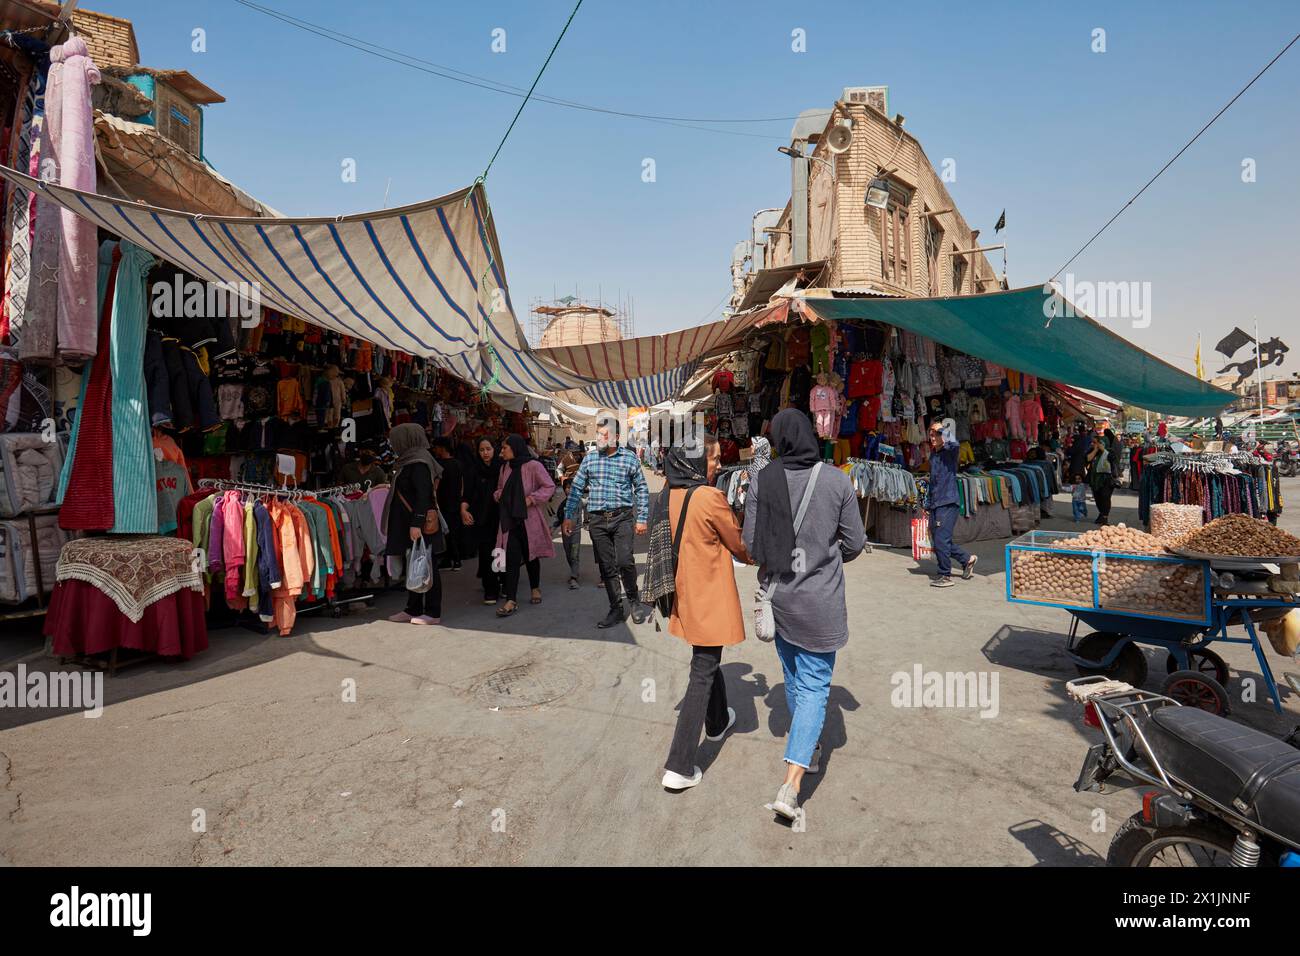 People walk in a street bazaar in the historic center of Isfahan, Iran. Stock Photo